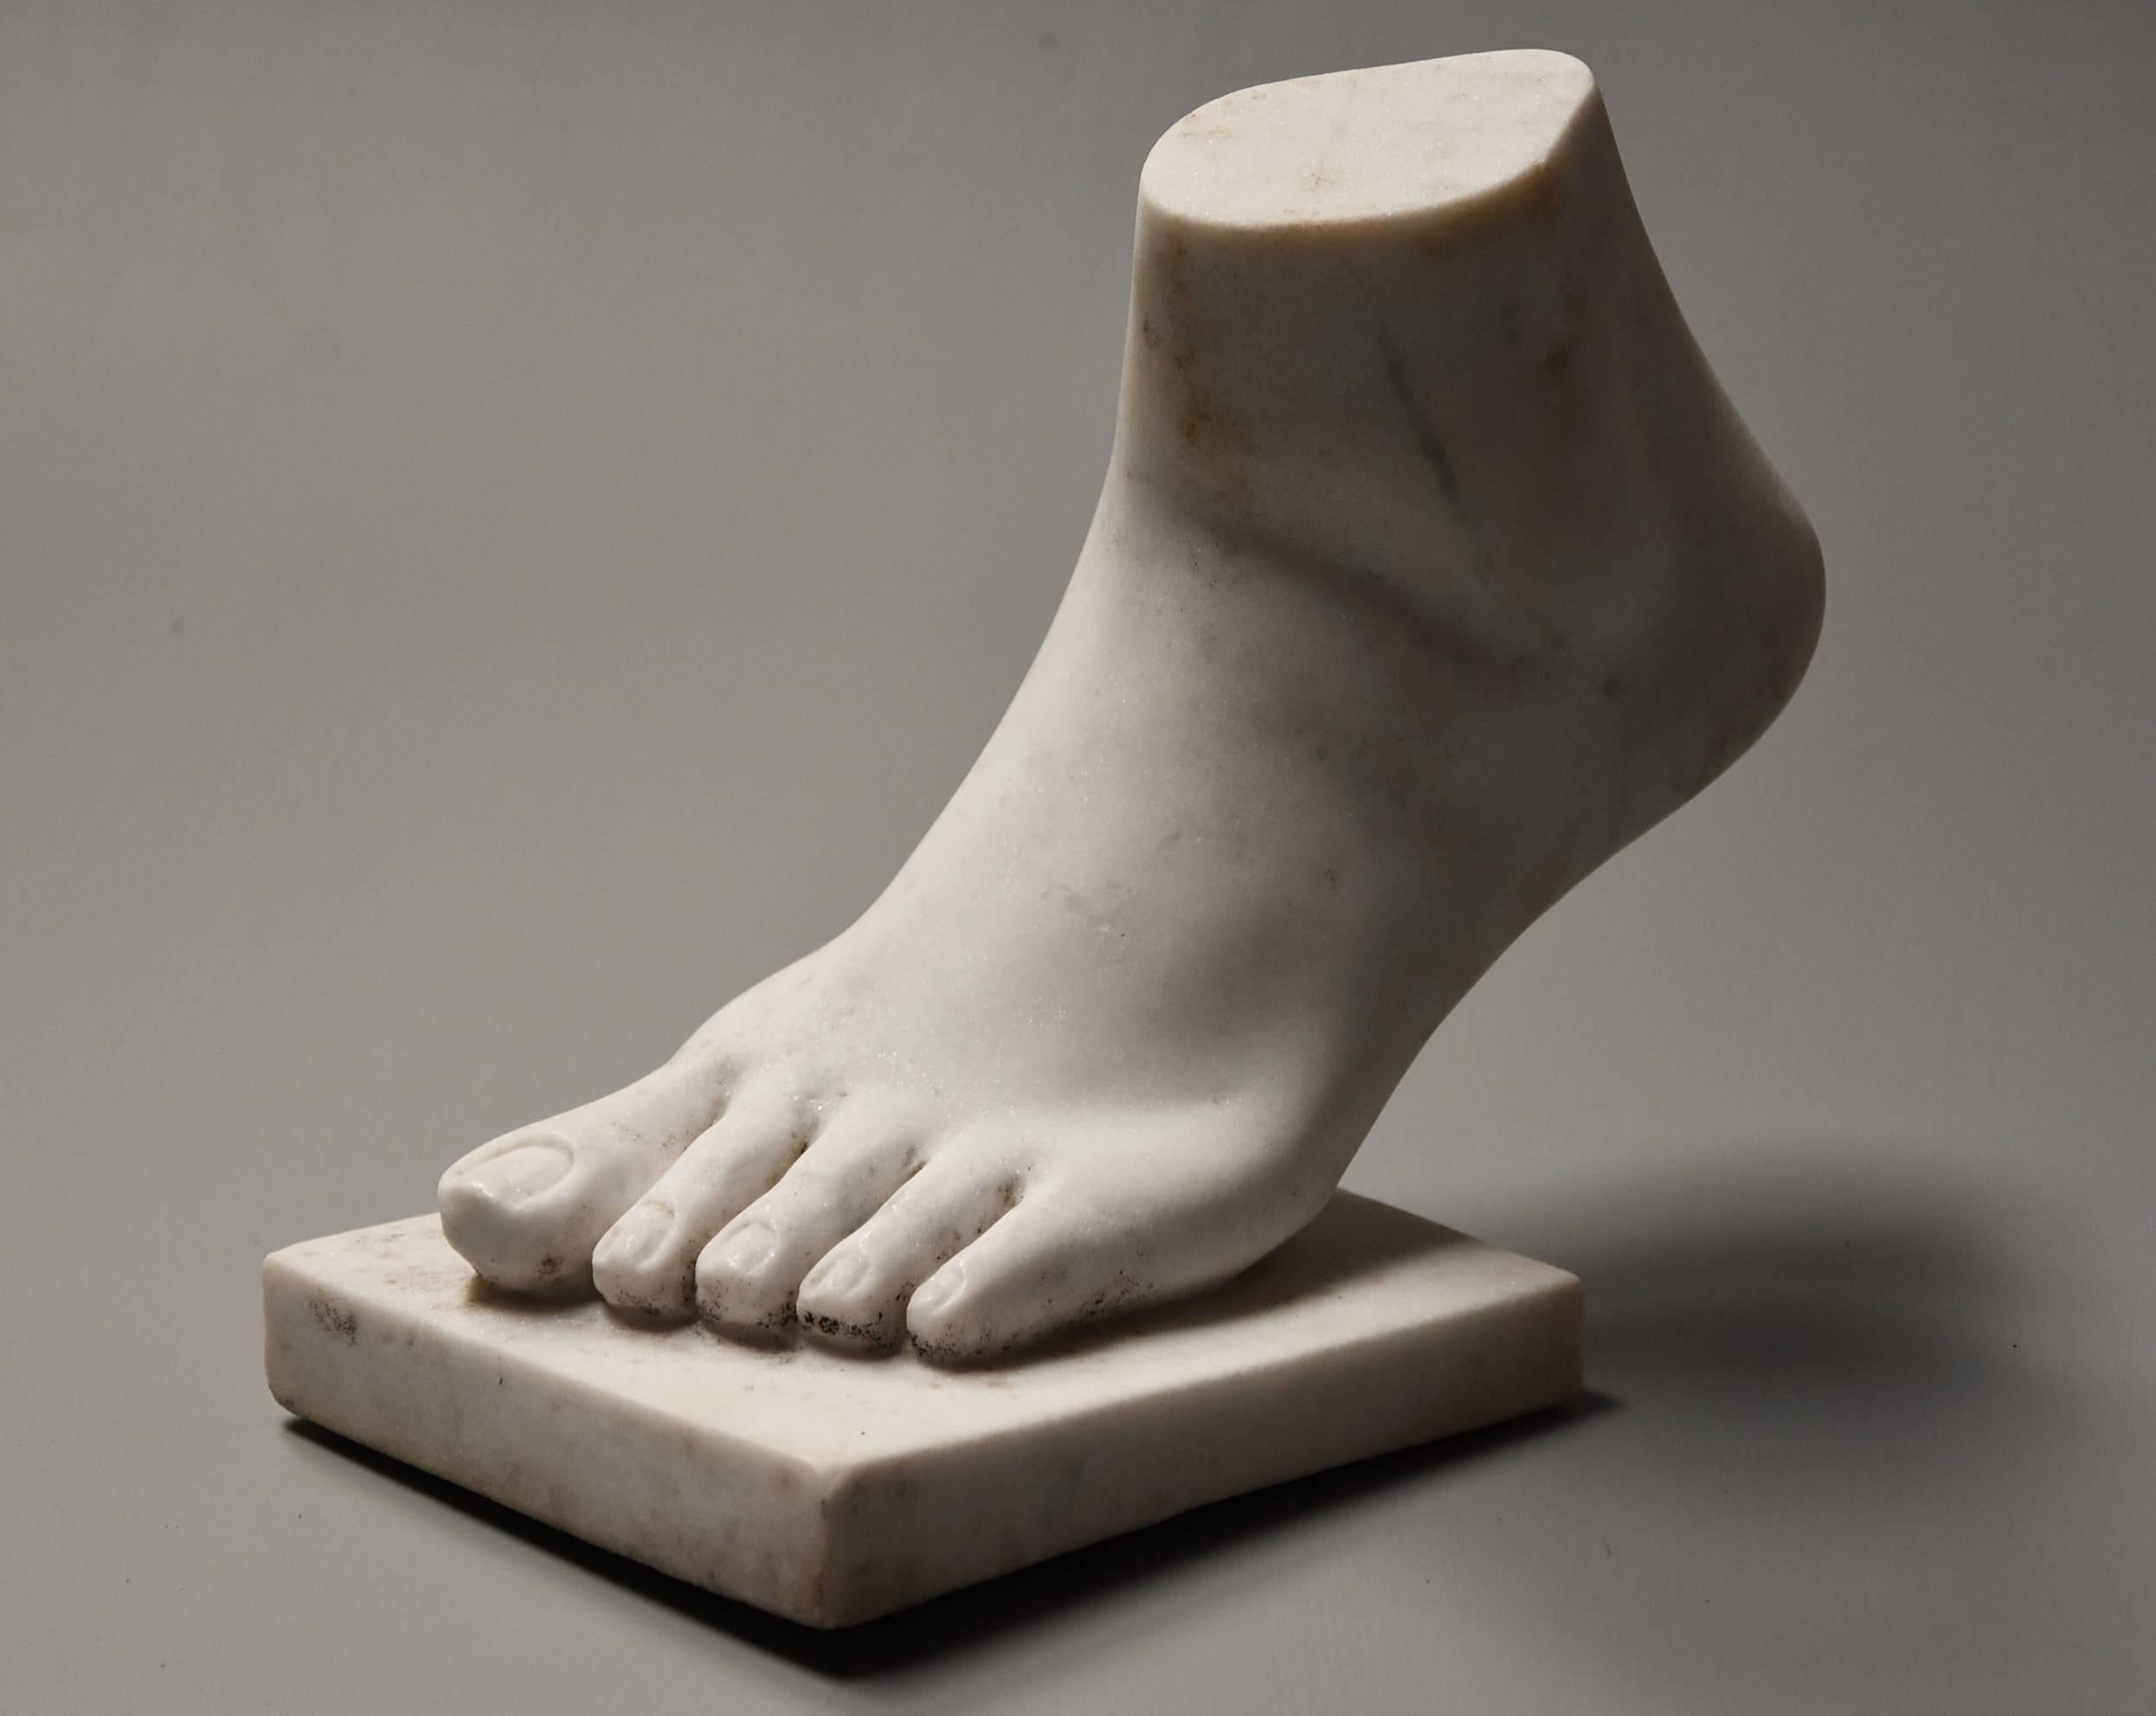 A late 19th century Italian Grand Tour style carved Carrara marble sculpture of a foot supported on a plinth, after the antique.

This marble carving of a foot is in very good condition for age and would make an interesting an decorative addition